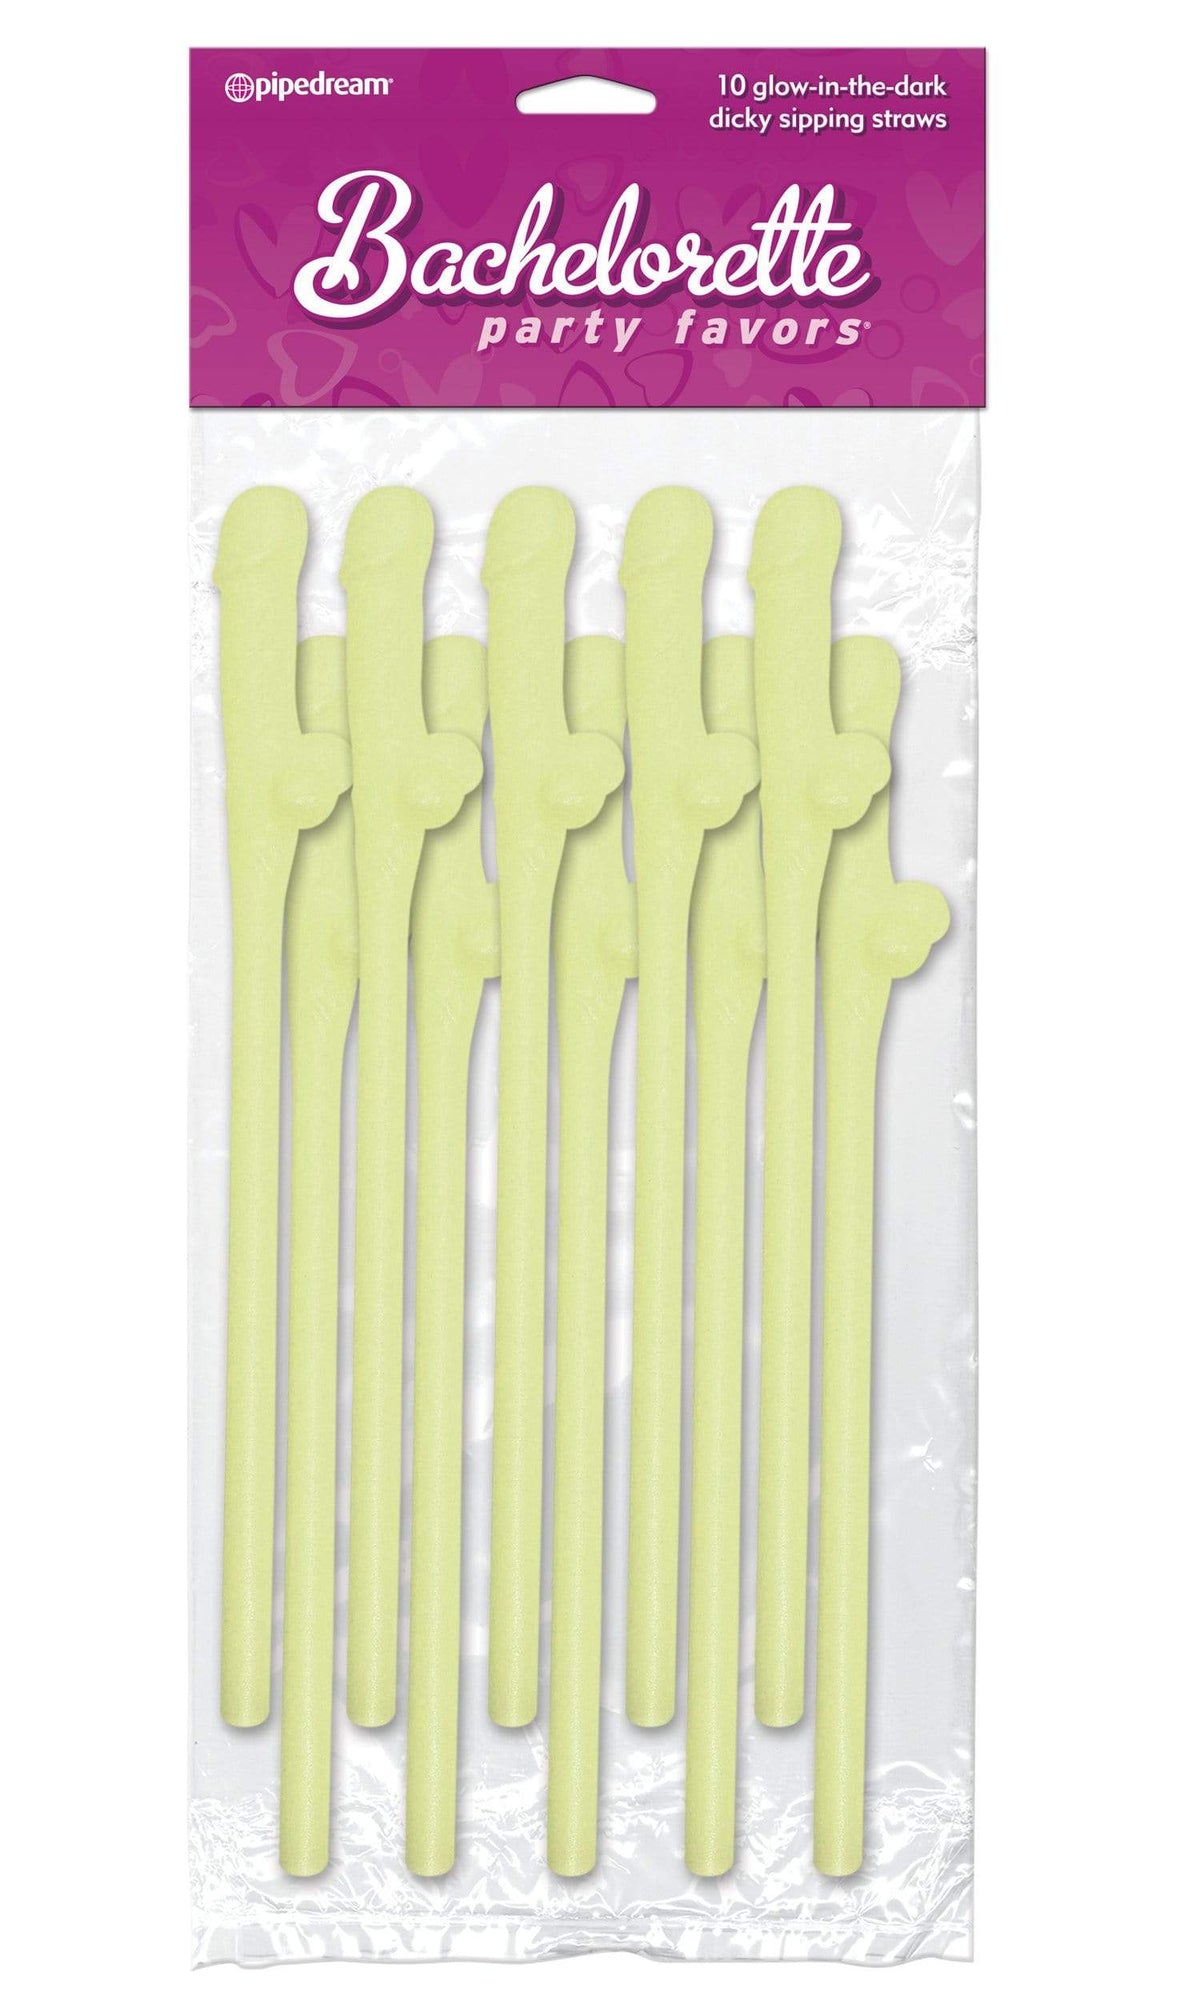 bachelorette party favors dicky sipping straws glow in the dark 10 piece